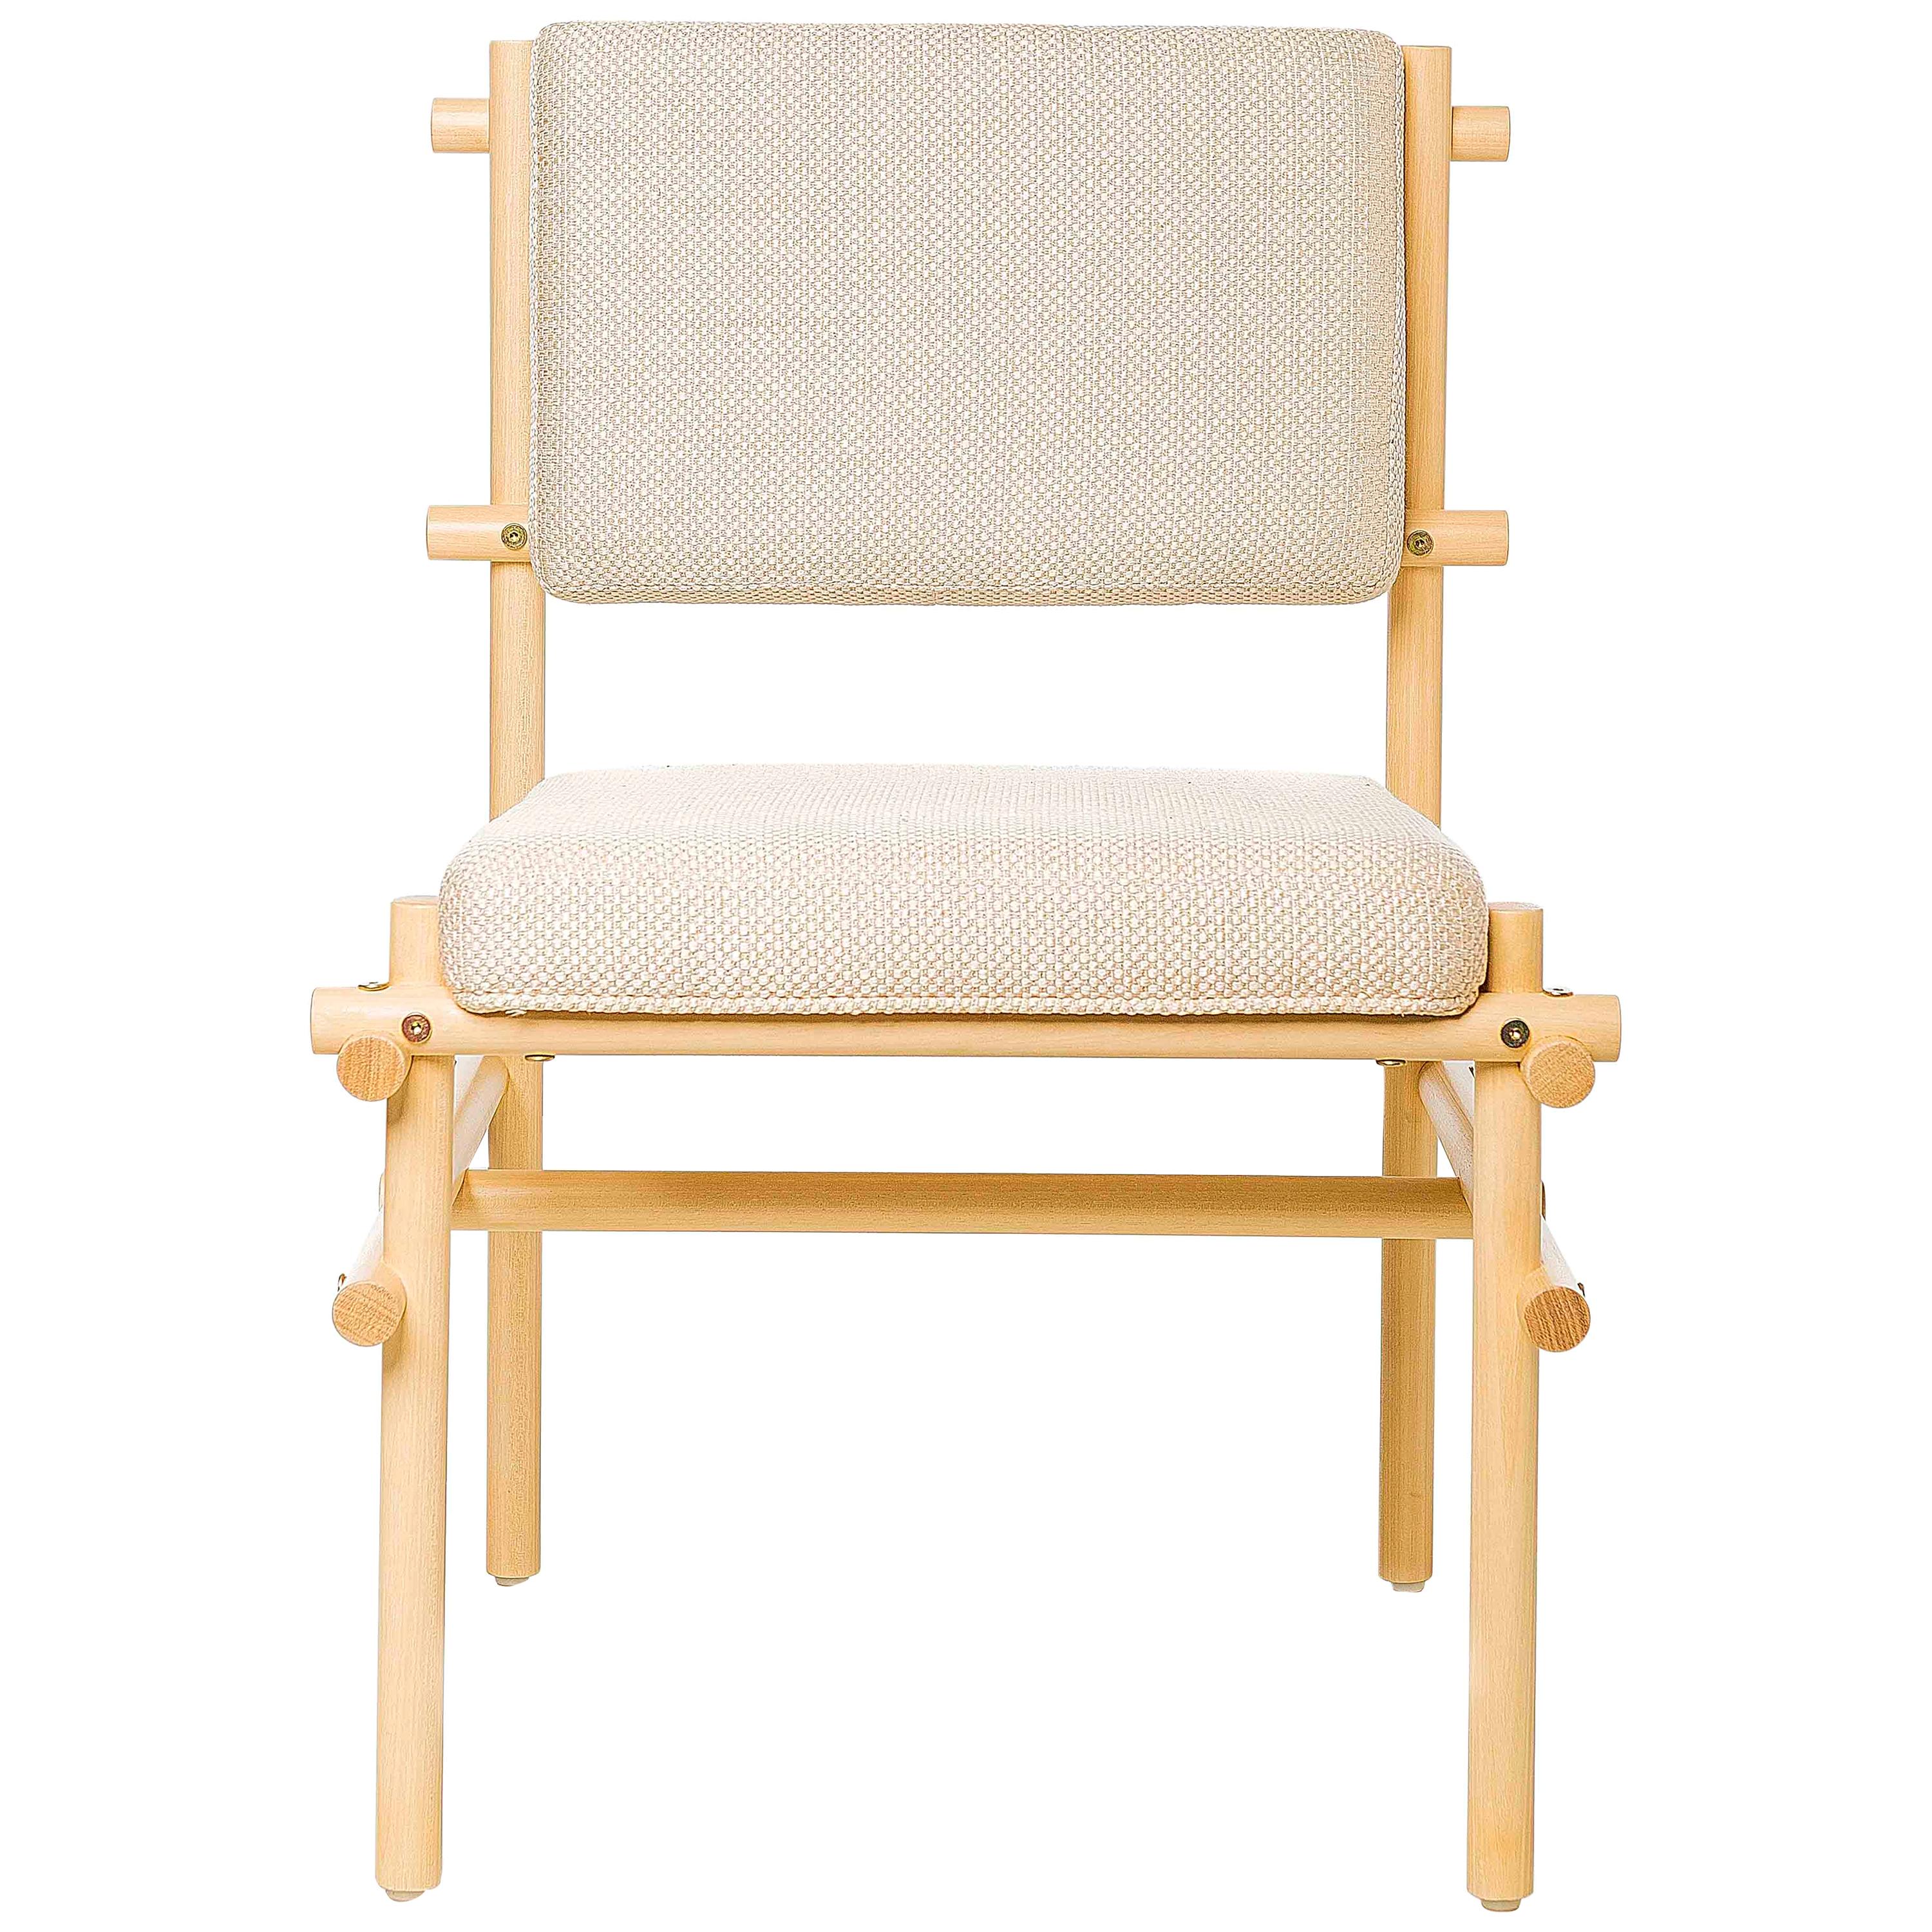 Natural Brazilian Wood Pipa Chair in Naked Style from Tiago Curioni